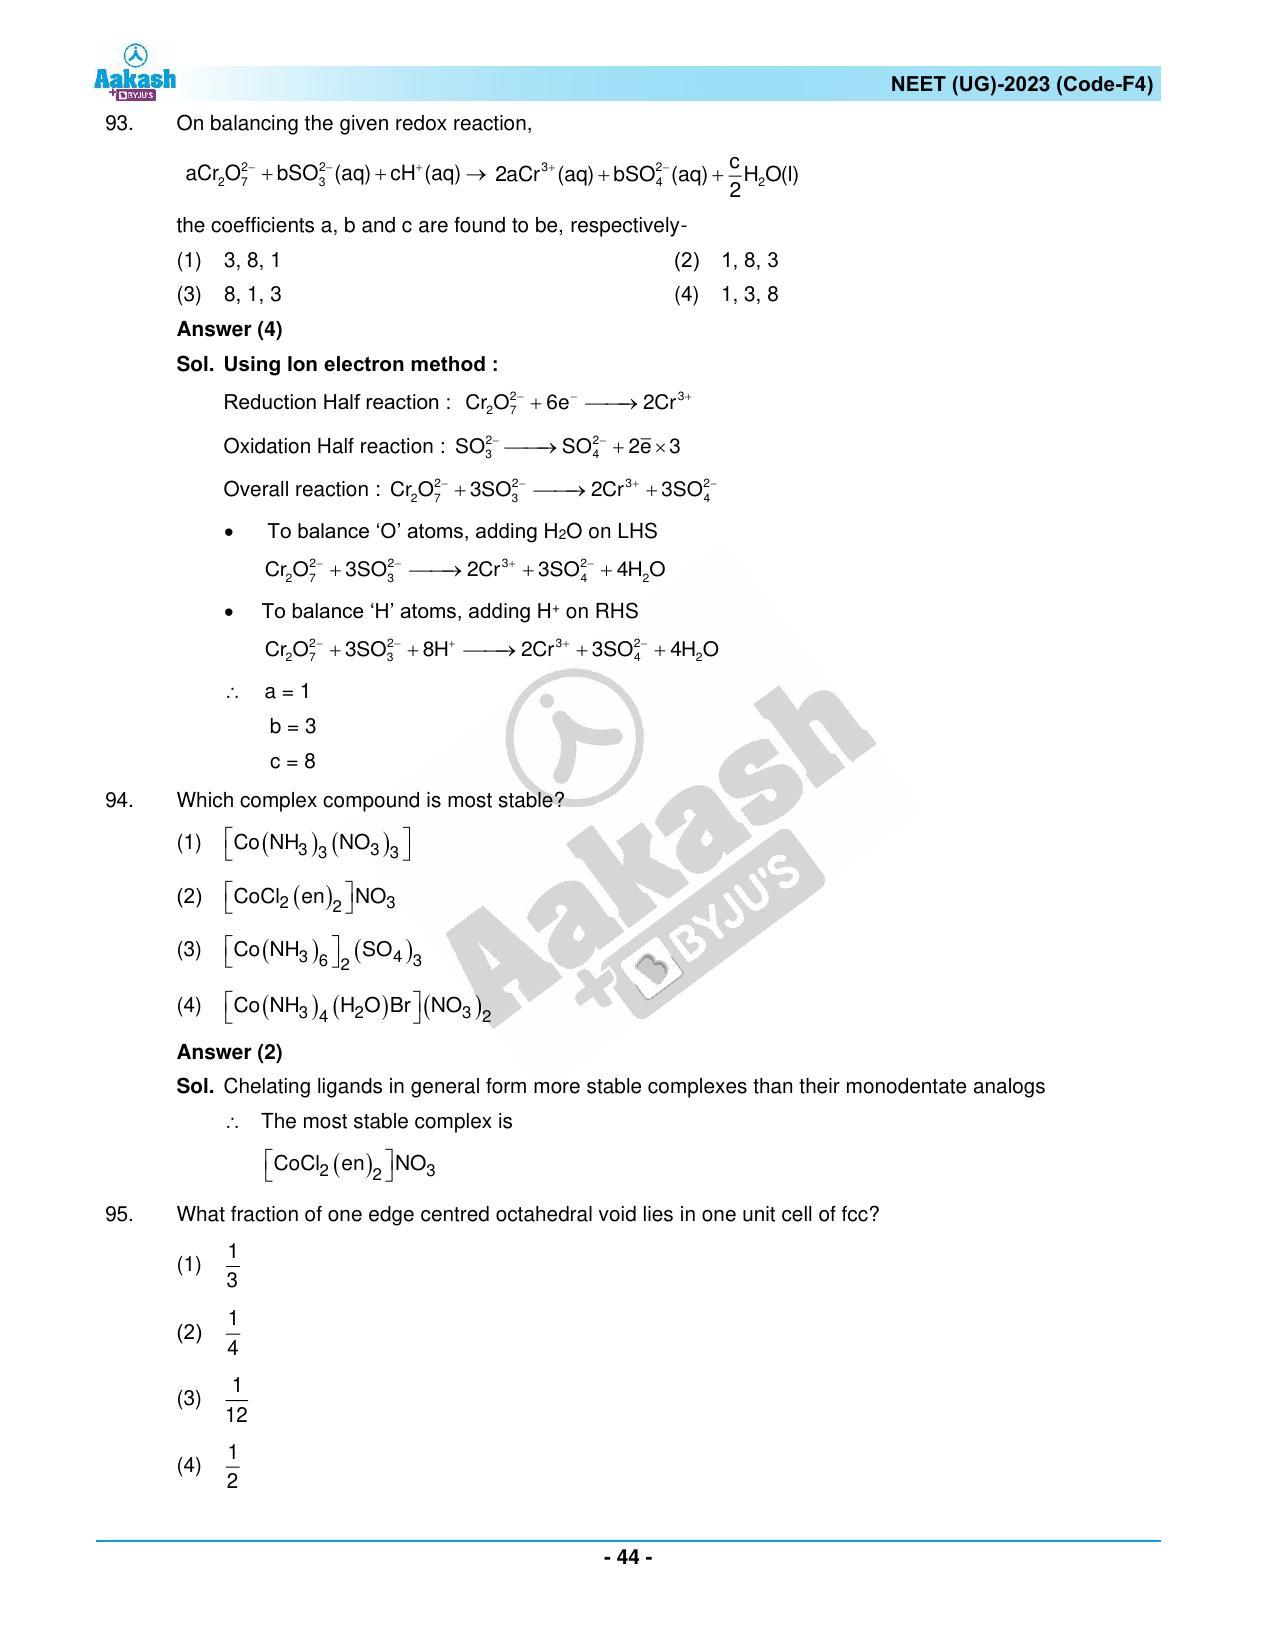 NEET 2023 Question Paper F4 - Page 44